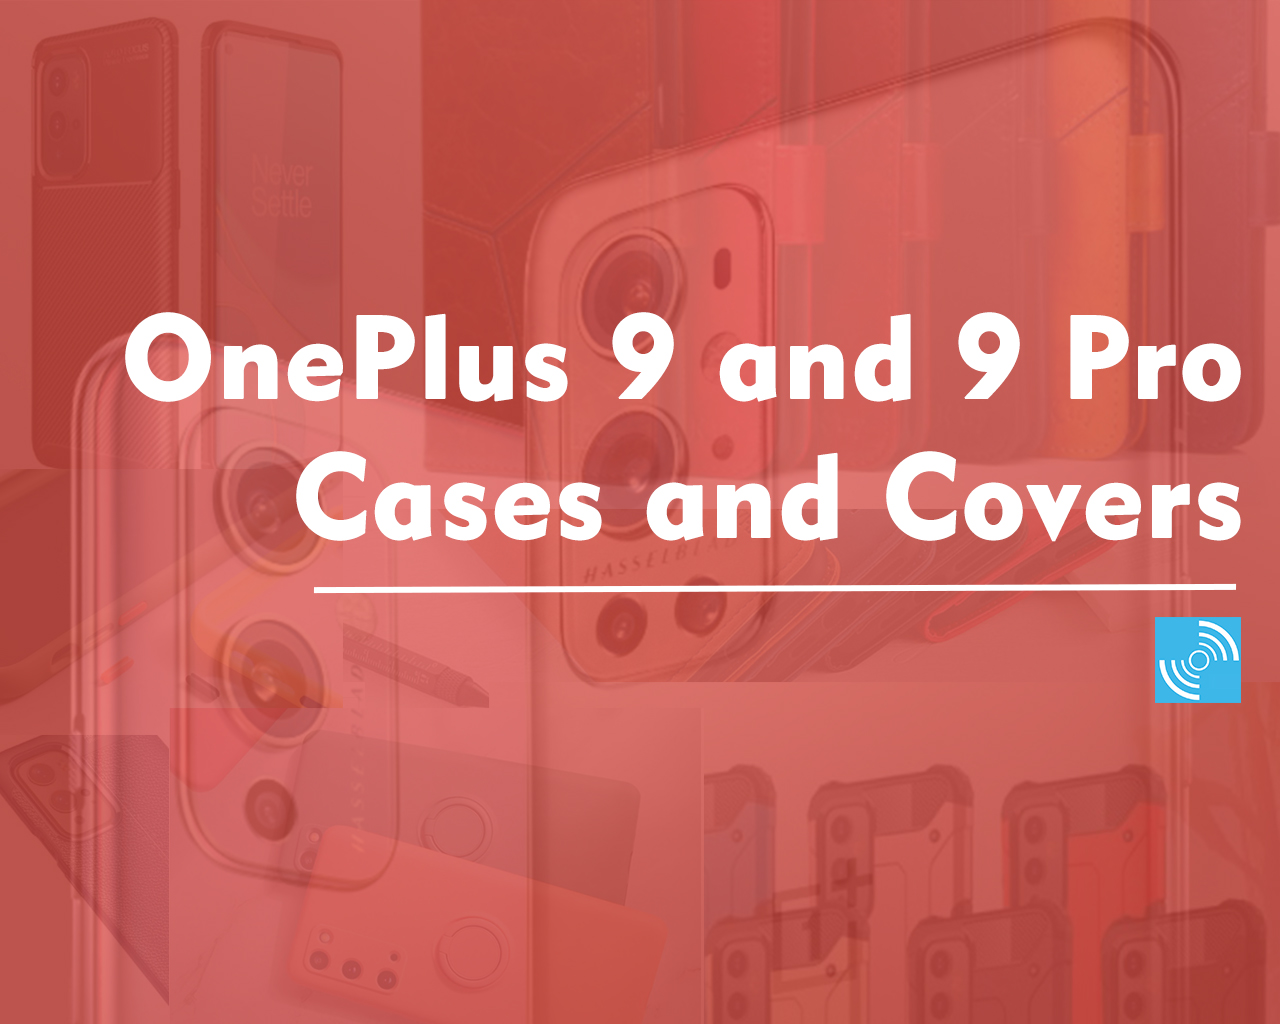 oneplus 9 cases and covers